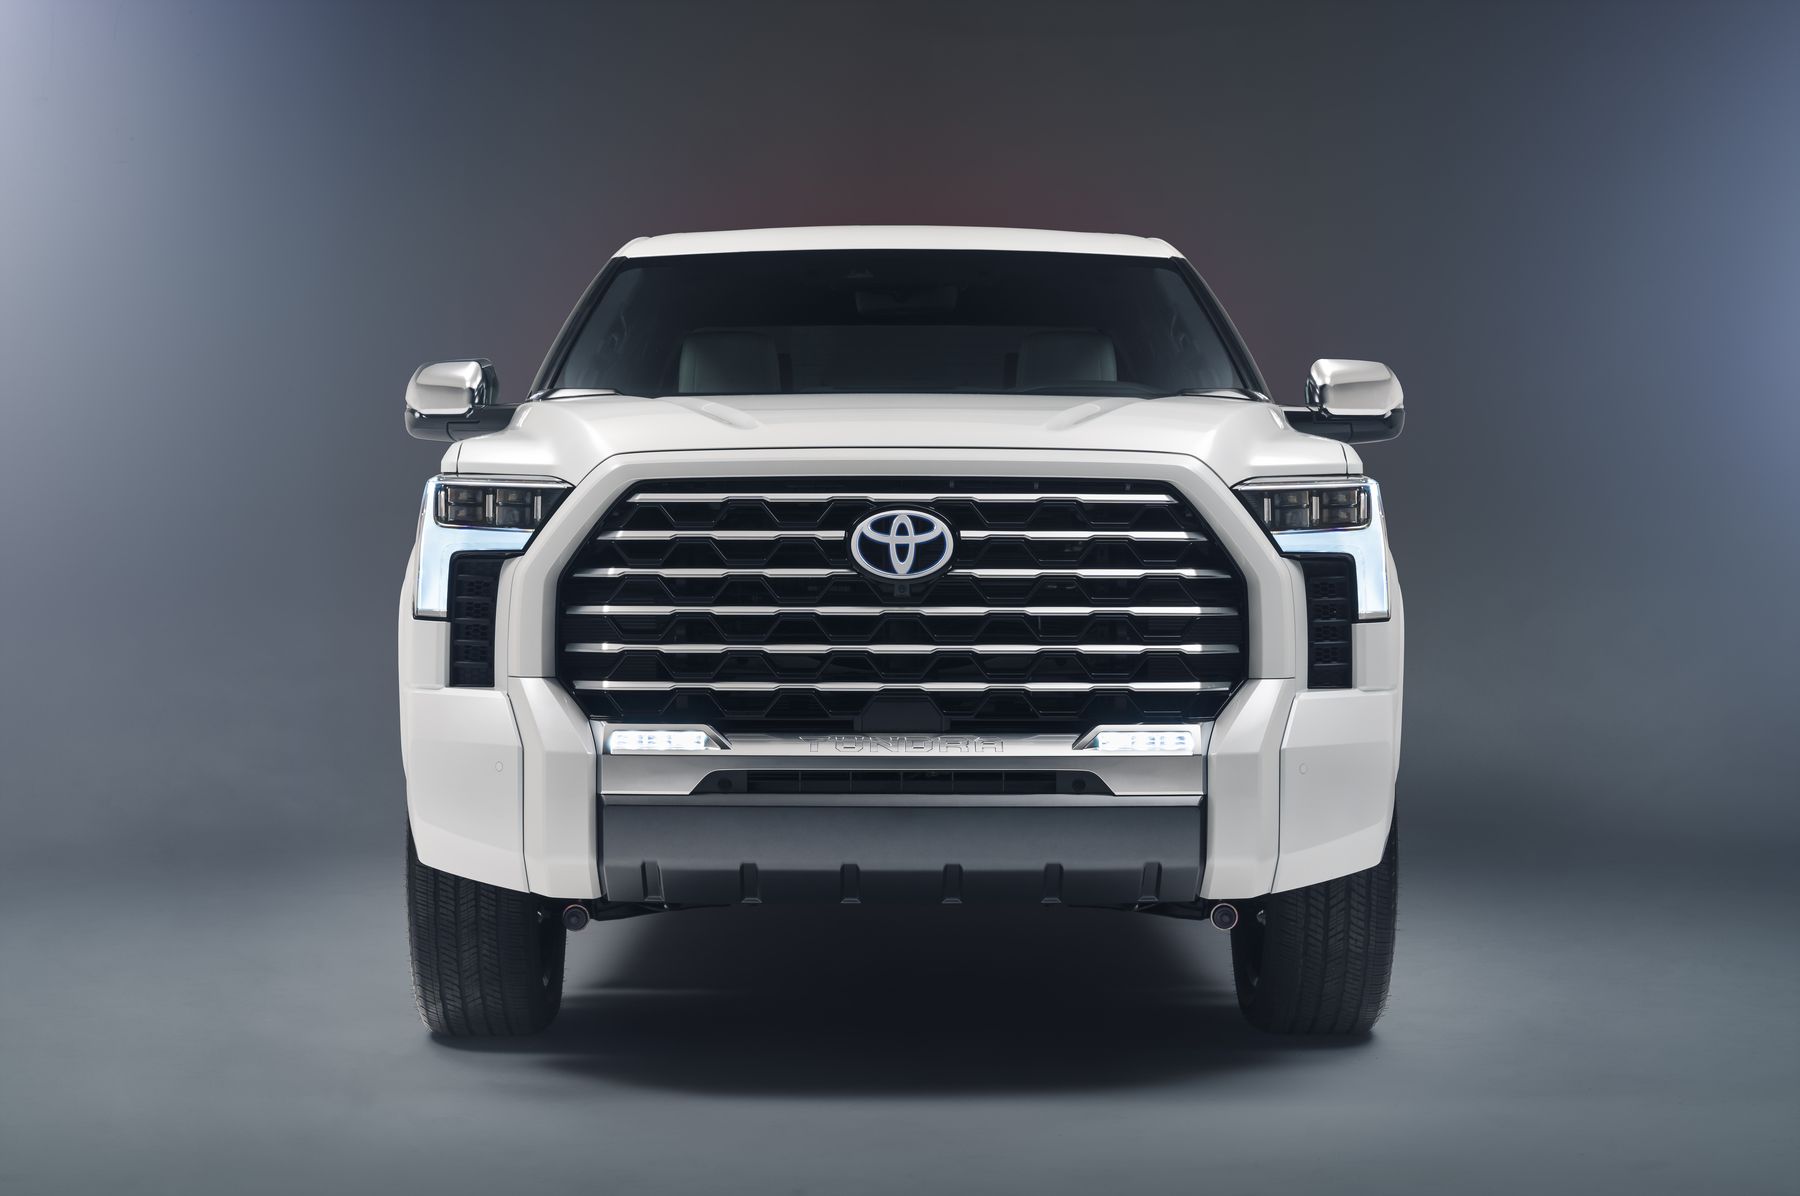 Toyota Tundra fuel economy hugely improved for 2022 Driving